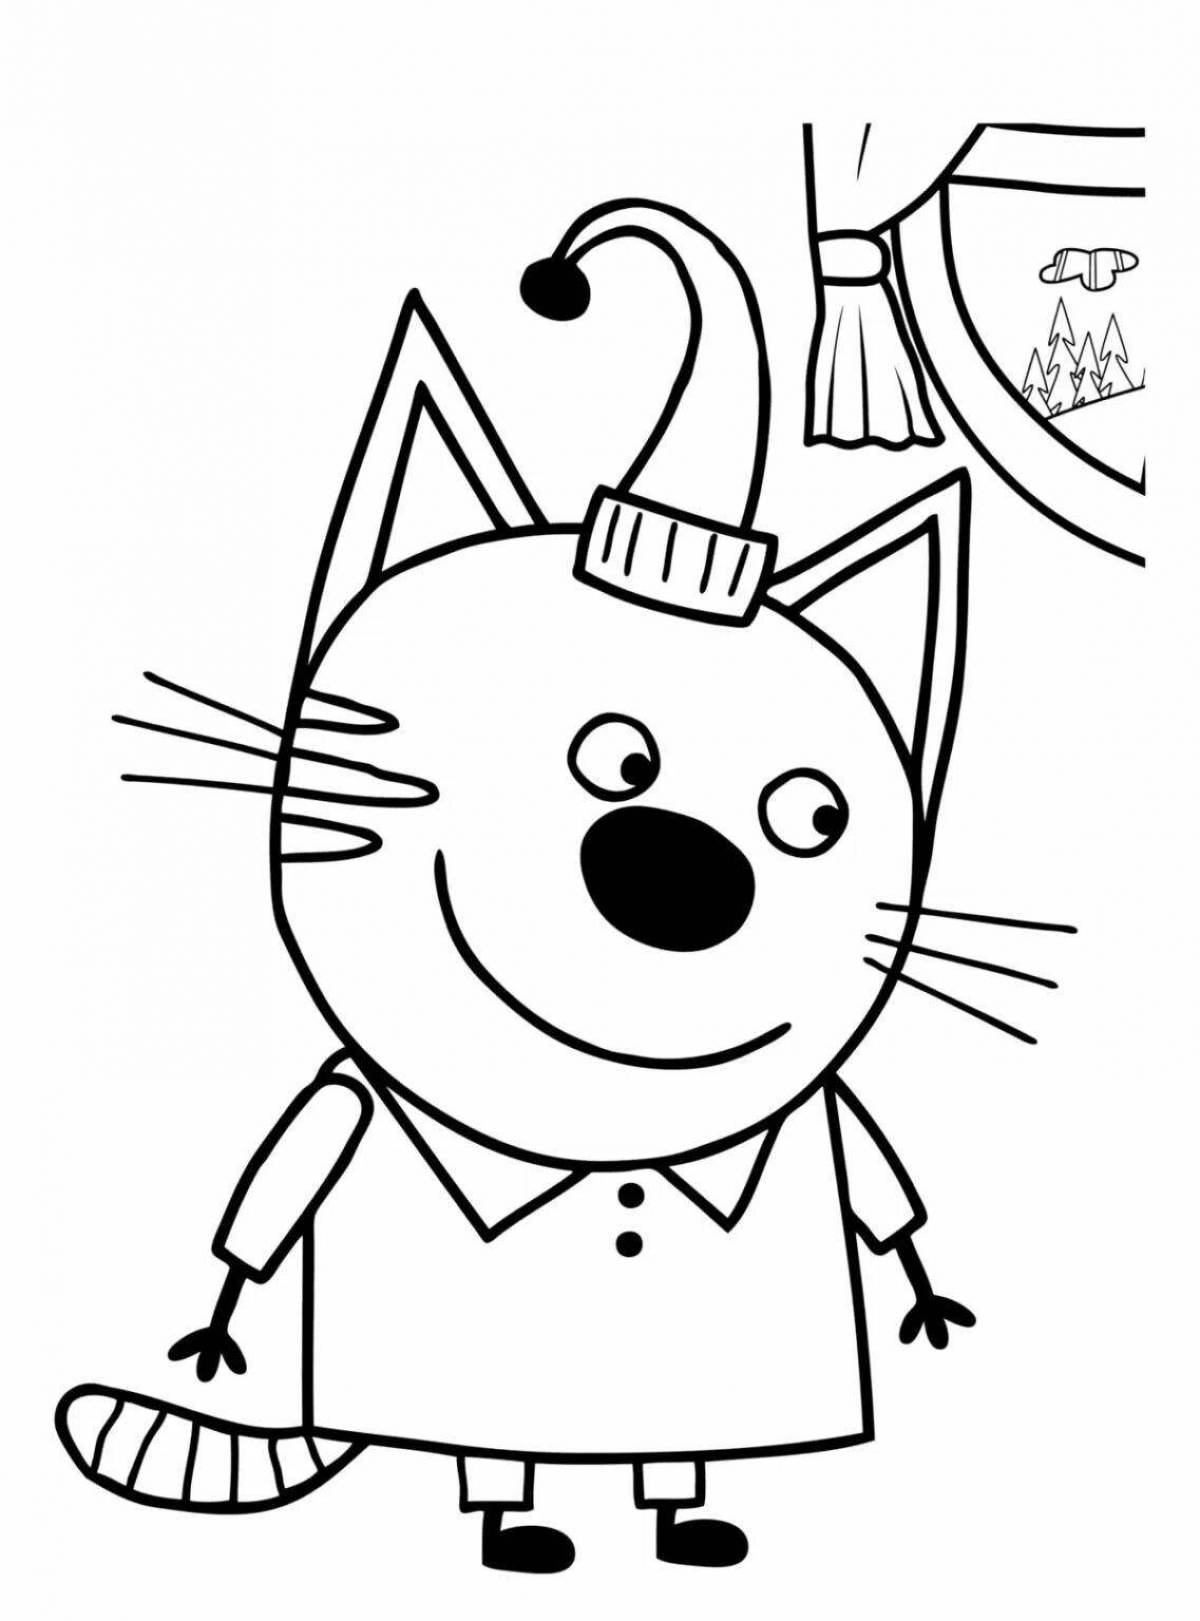 Amazing coloring book for girls 3 years old 3 cats